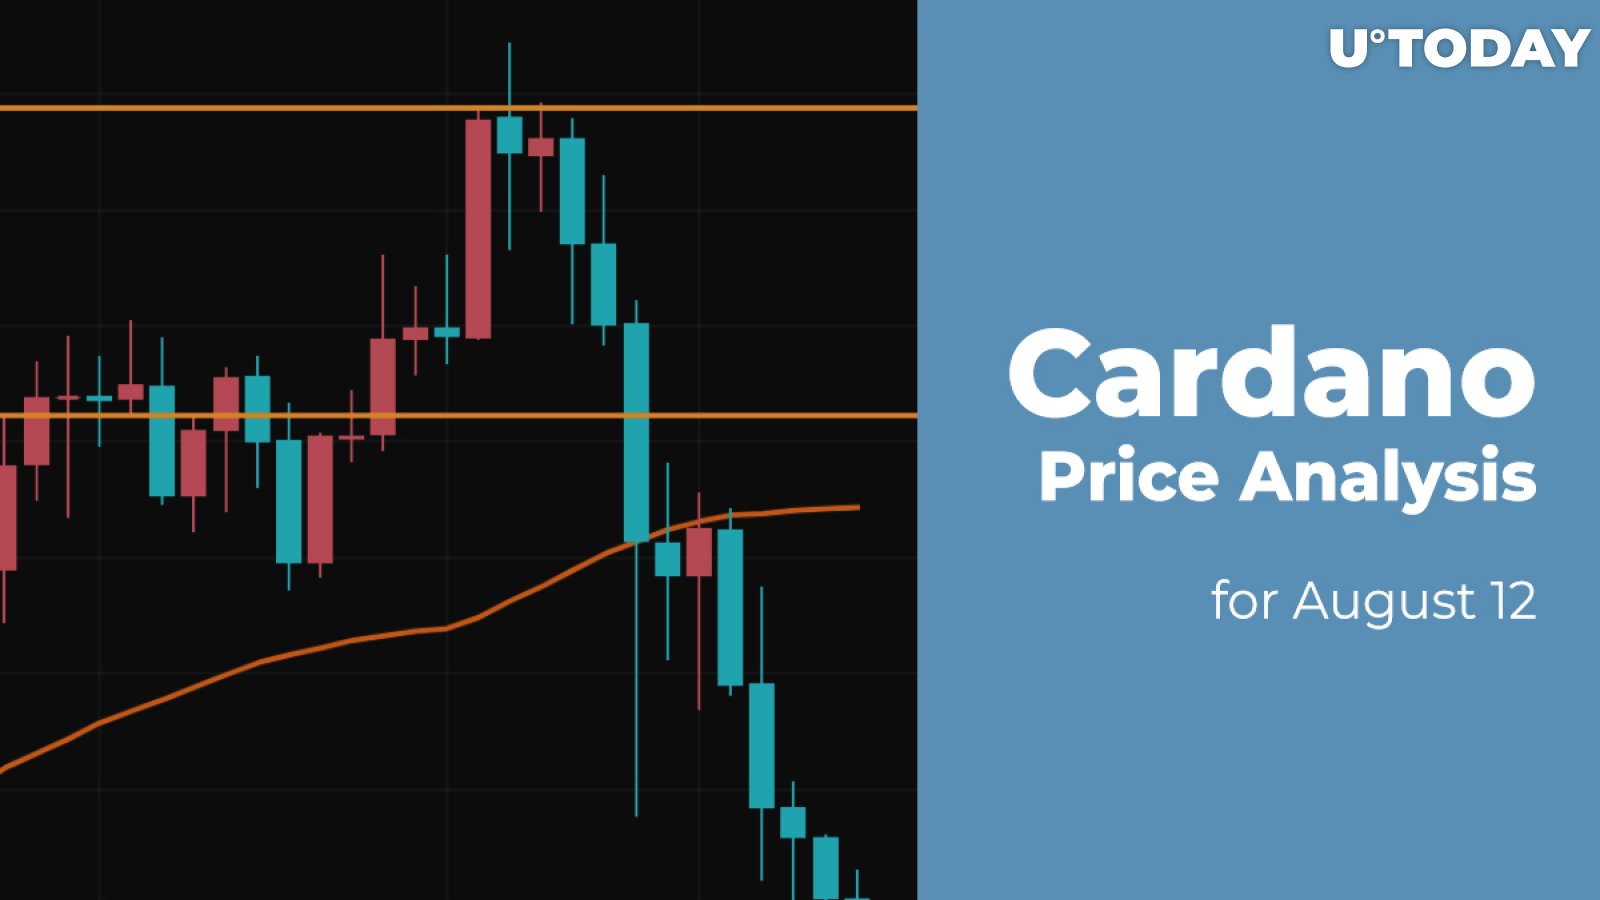 Cardano (ADA) Price Analysis for August 12